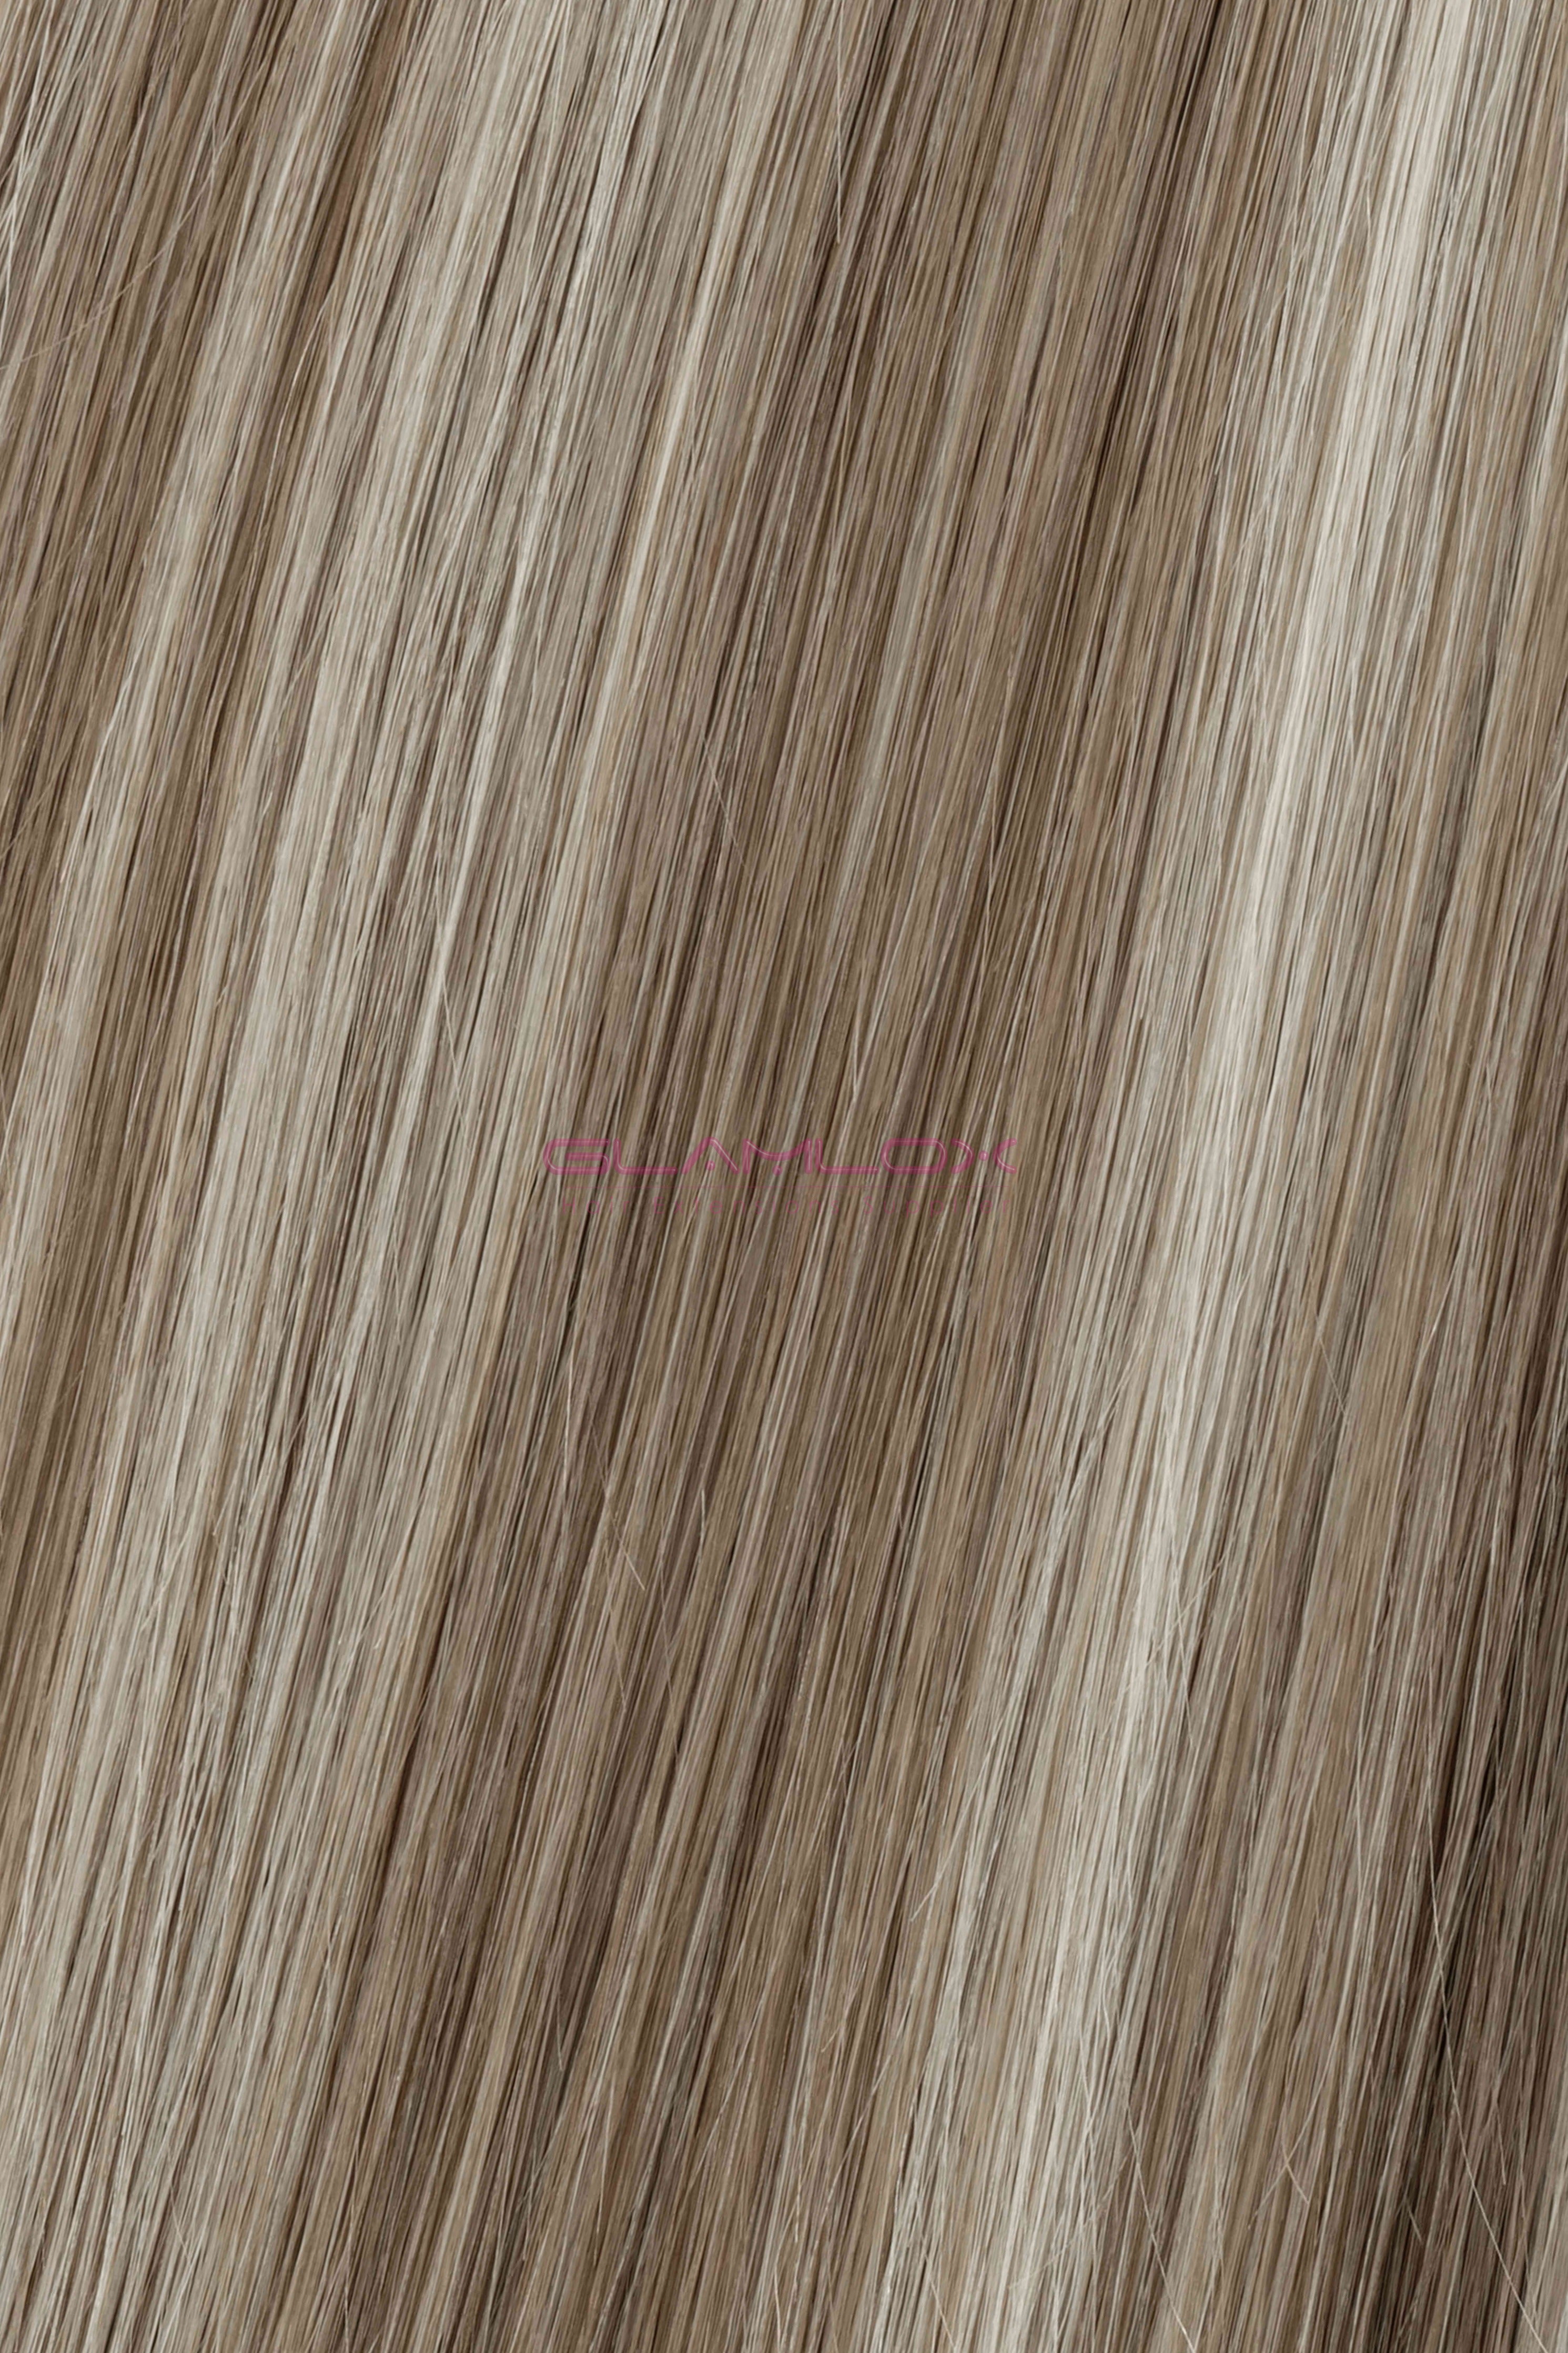 24" - 26" Full Weft Hair Extensions - Russian Mongolian Double Drawn Remy Human Hair